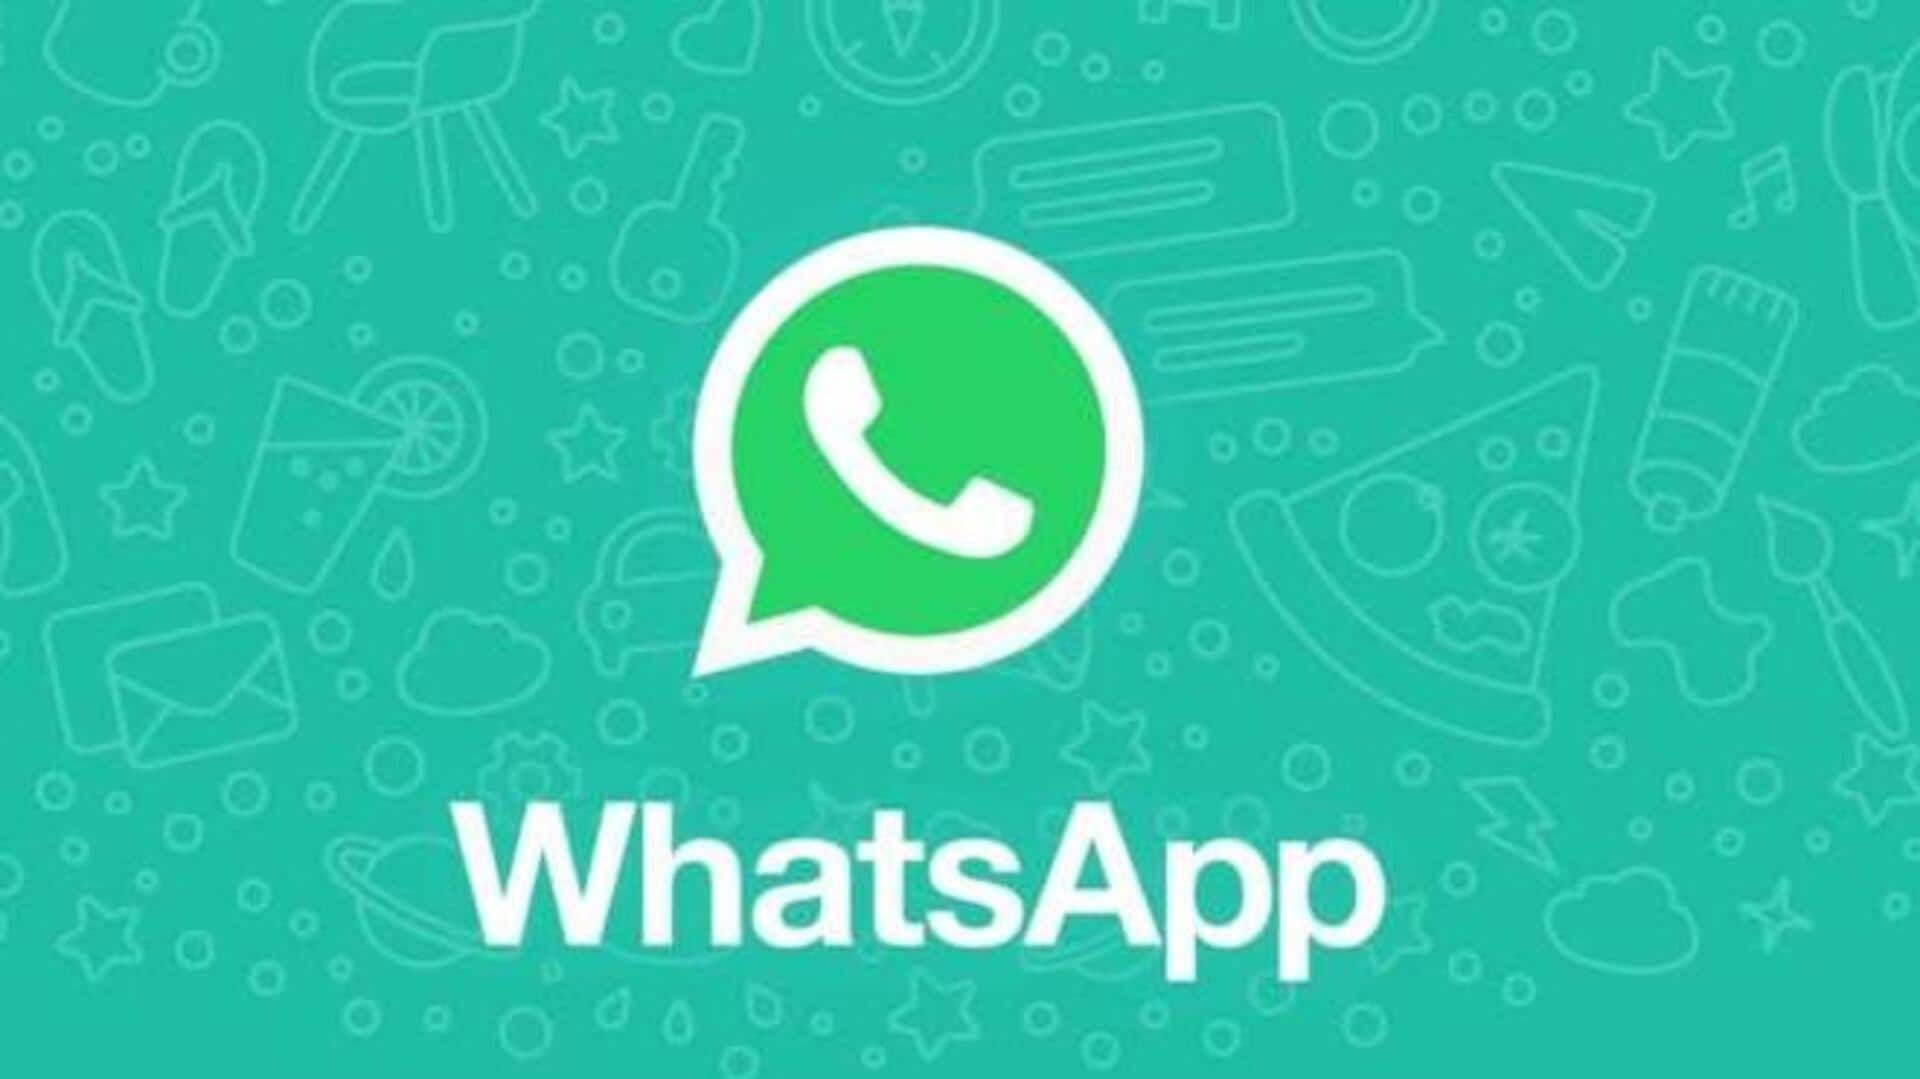 WhatsApp may soon let you reply to 'Channel' updates